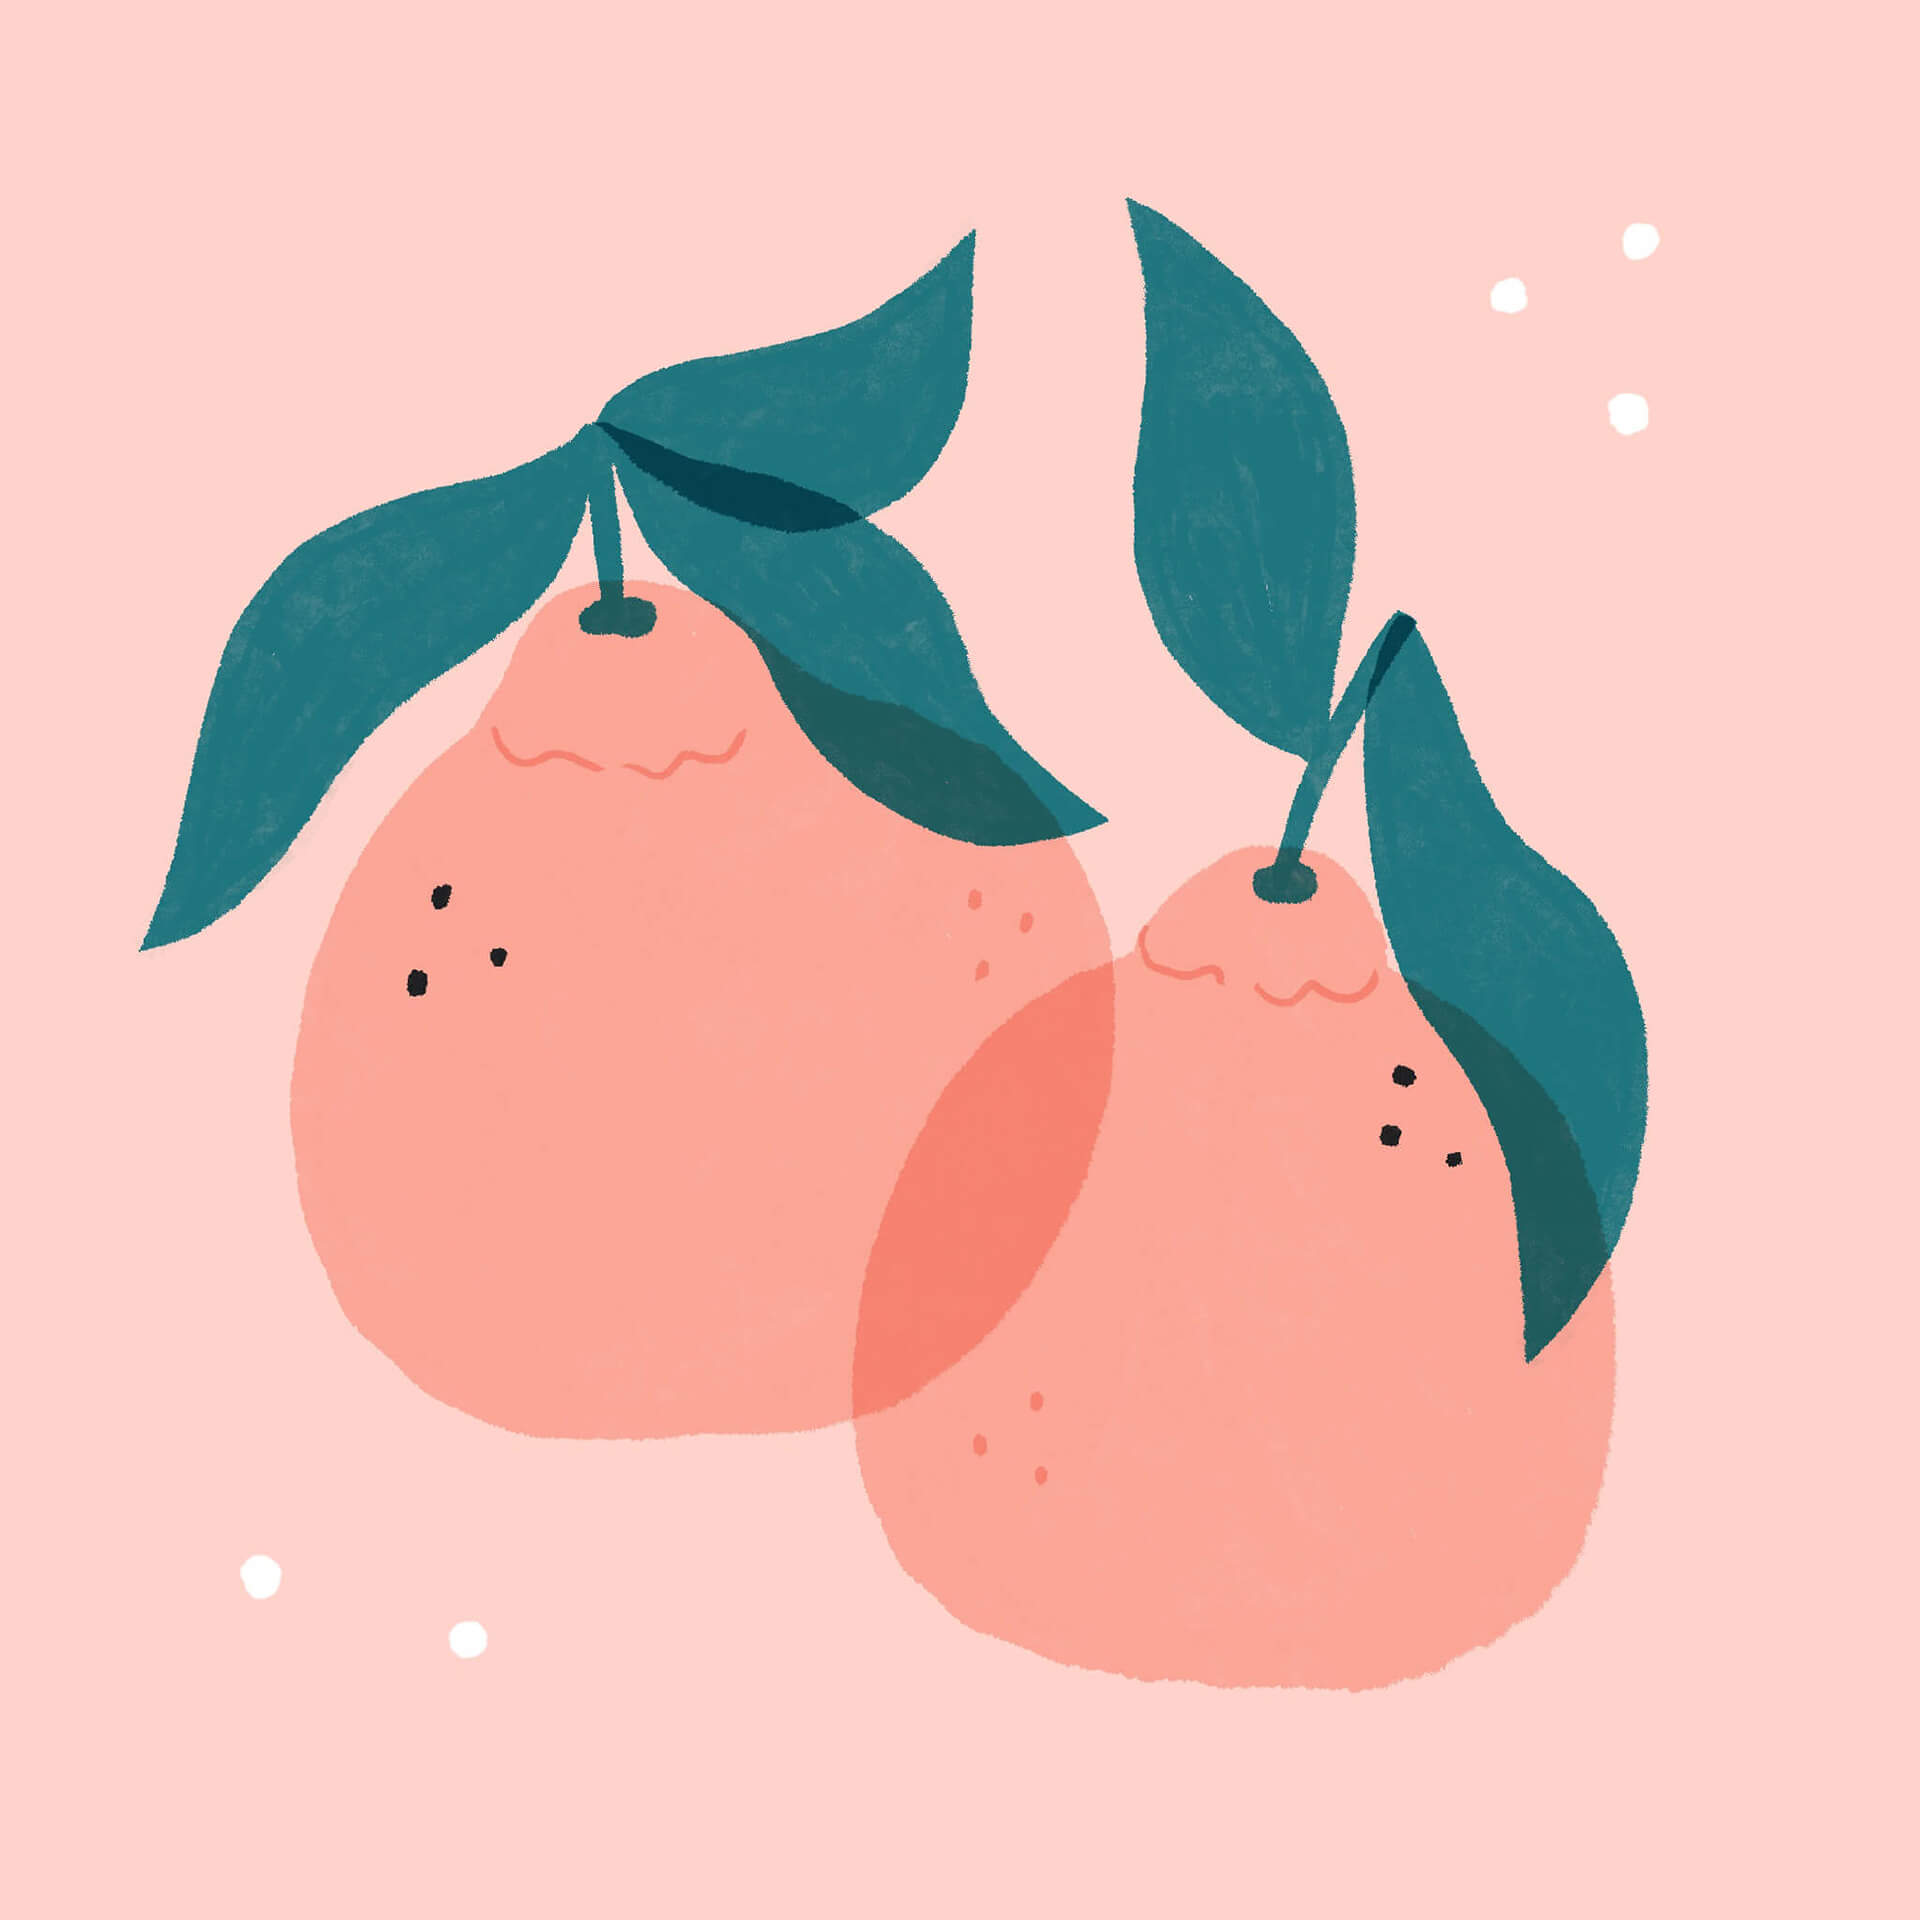 An illustration of two leafy sumo oranges